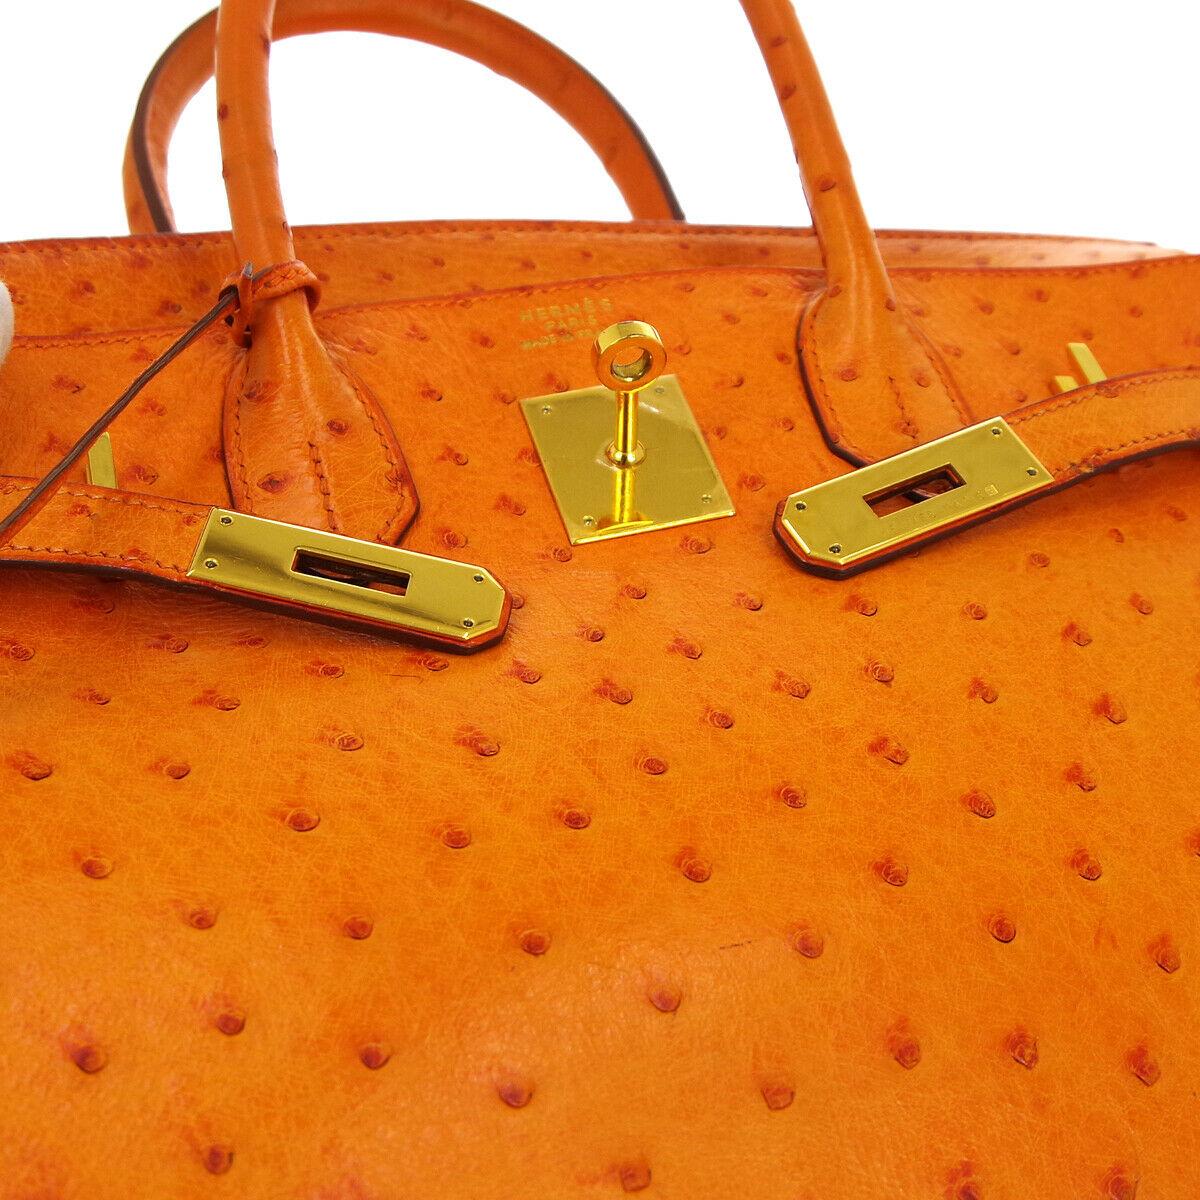 Hermes Birkin 30 Orange Exotic Ostrich Leather Gold Top Handle Satchel Tote Bag

Ostrich leather
Gold tone hardware
Leather lining
Date code present
Made in France
Handle drop 4